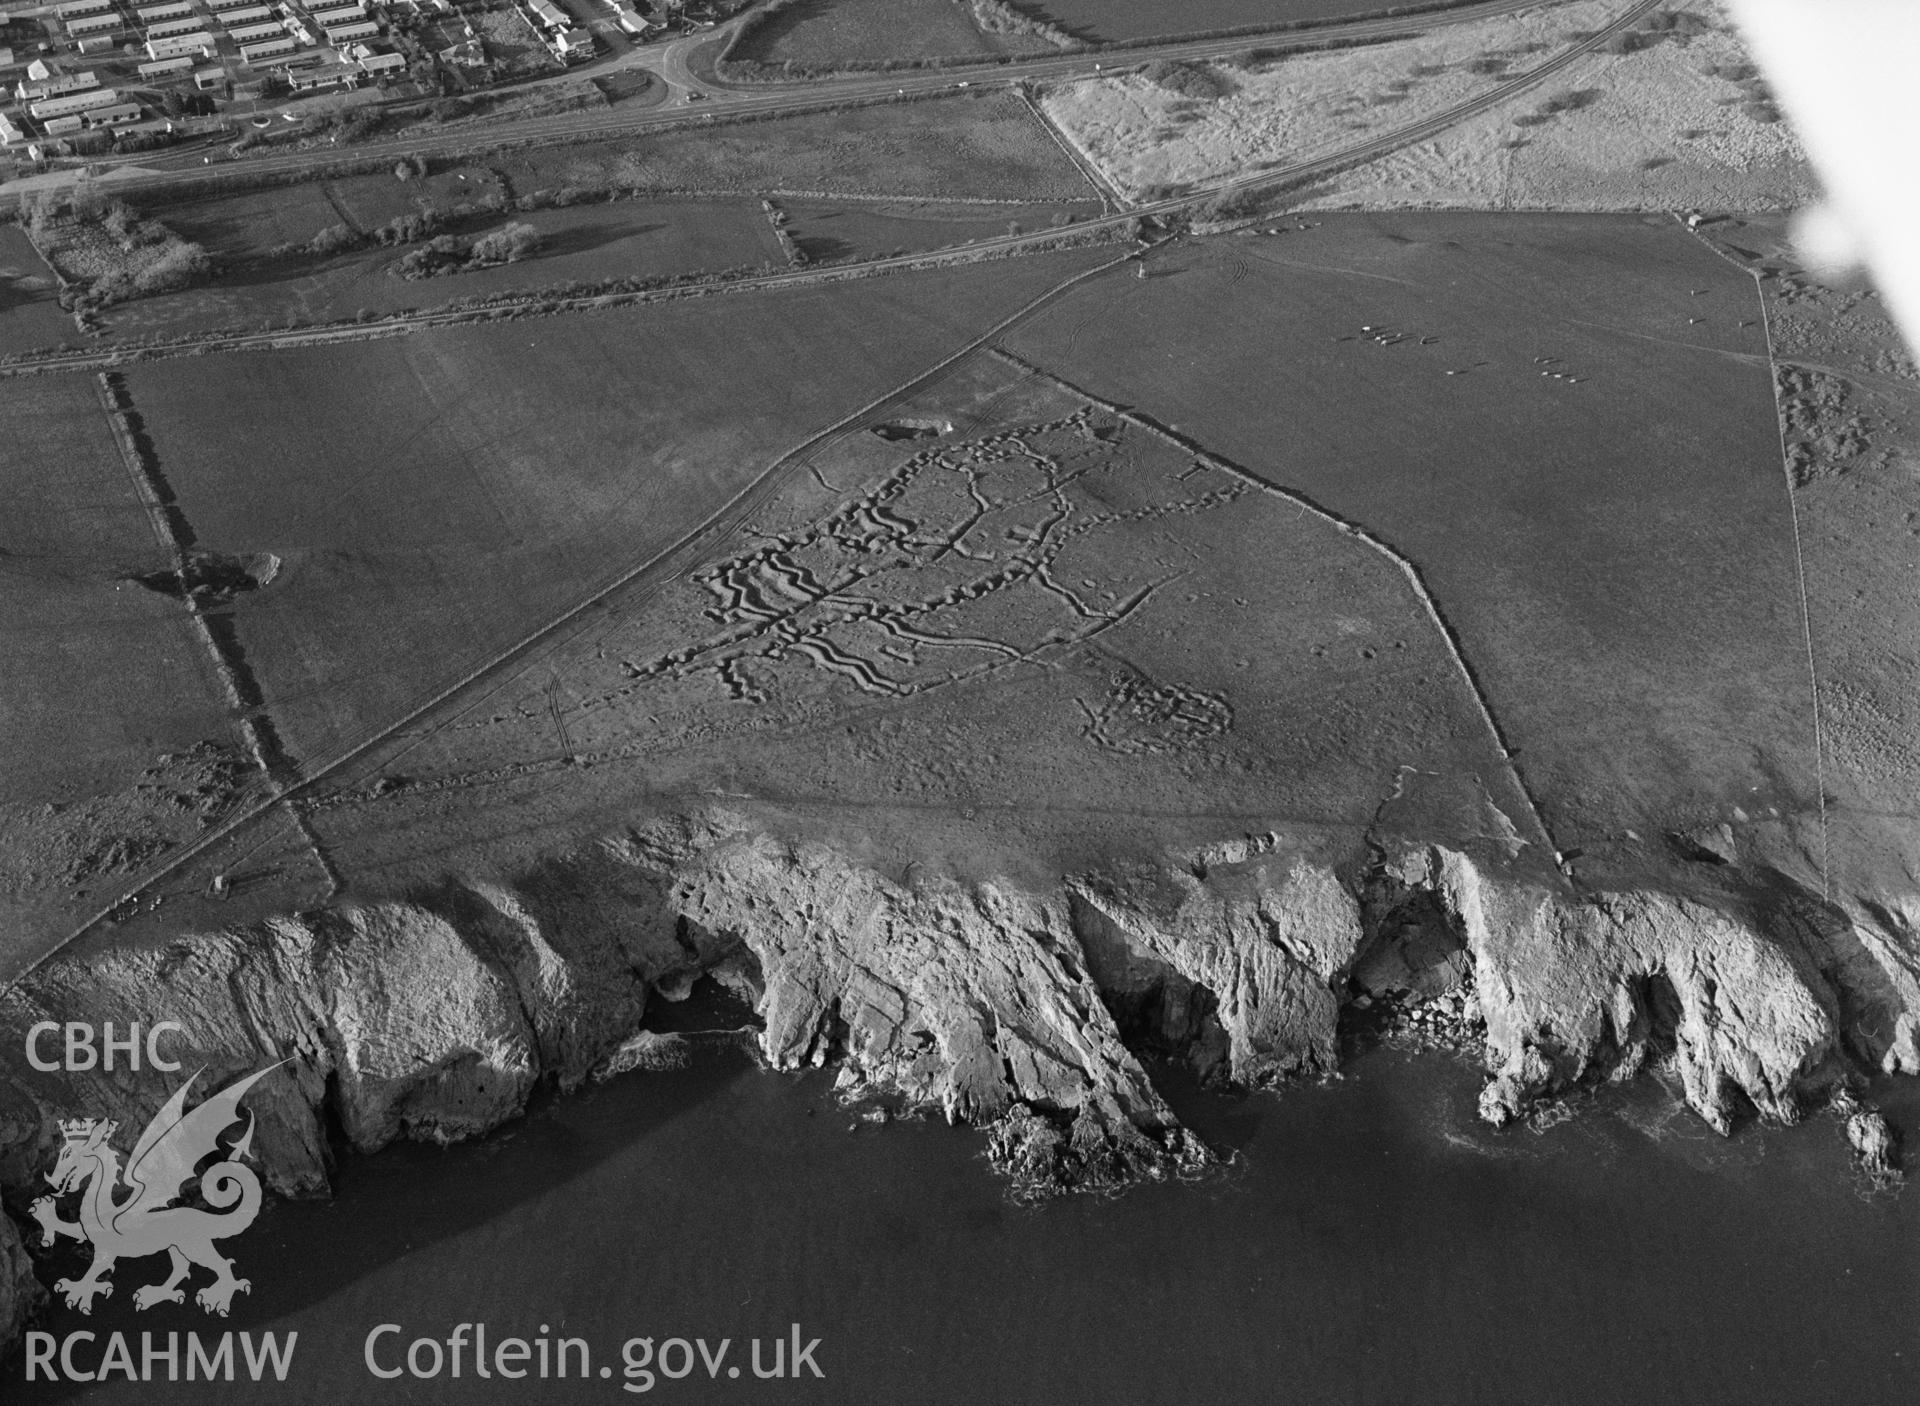 RCAHMW Black and white oblique aerial photograph of Penally WW1 Practice Trench System, taken on 24/03/1991 by CR Musson